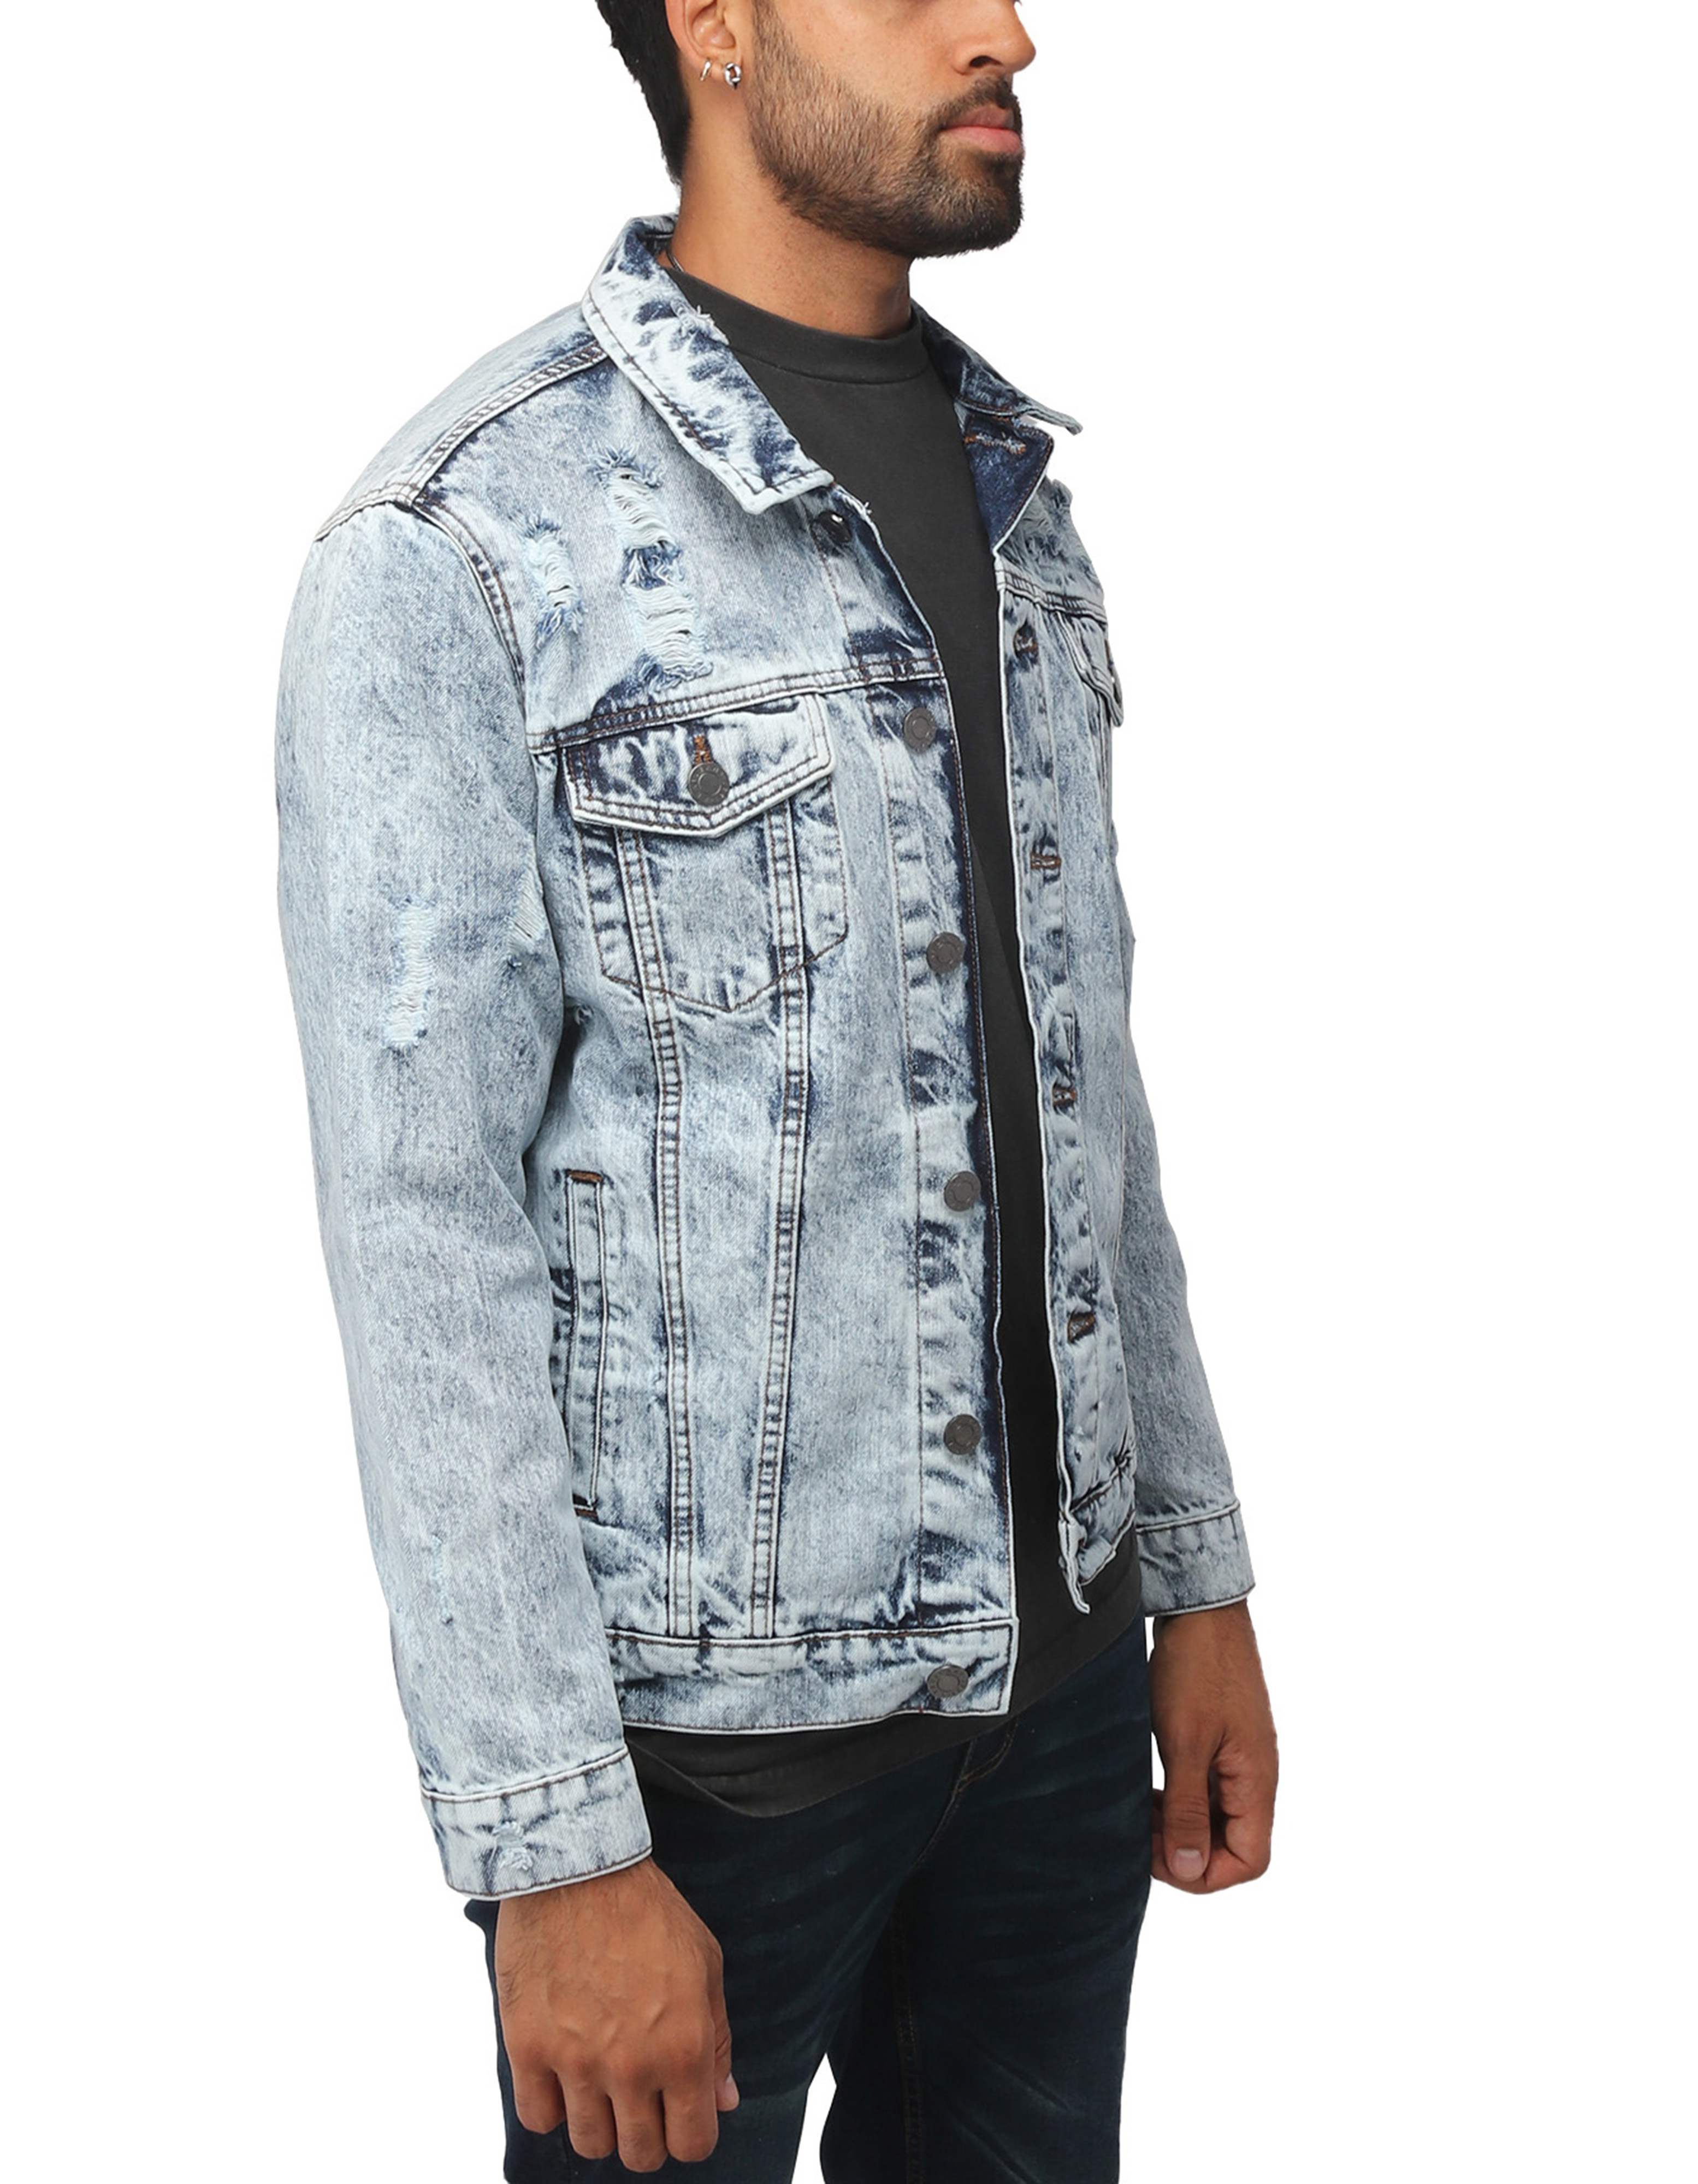 X RAY Men's Denim Jacket, Washed Ripped Distressed Flex Stretch Casual Trucker Biker Jean Jacket, Acid Blue - Ripped, Small - image 2 of 9